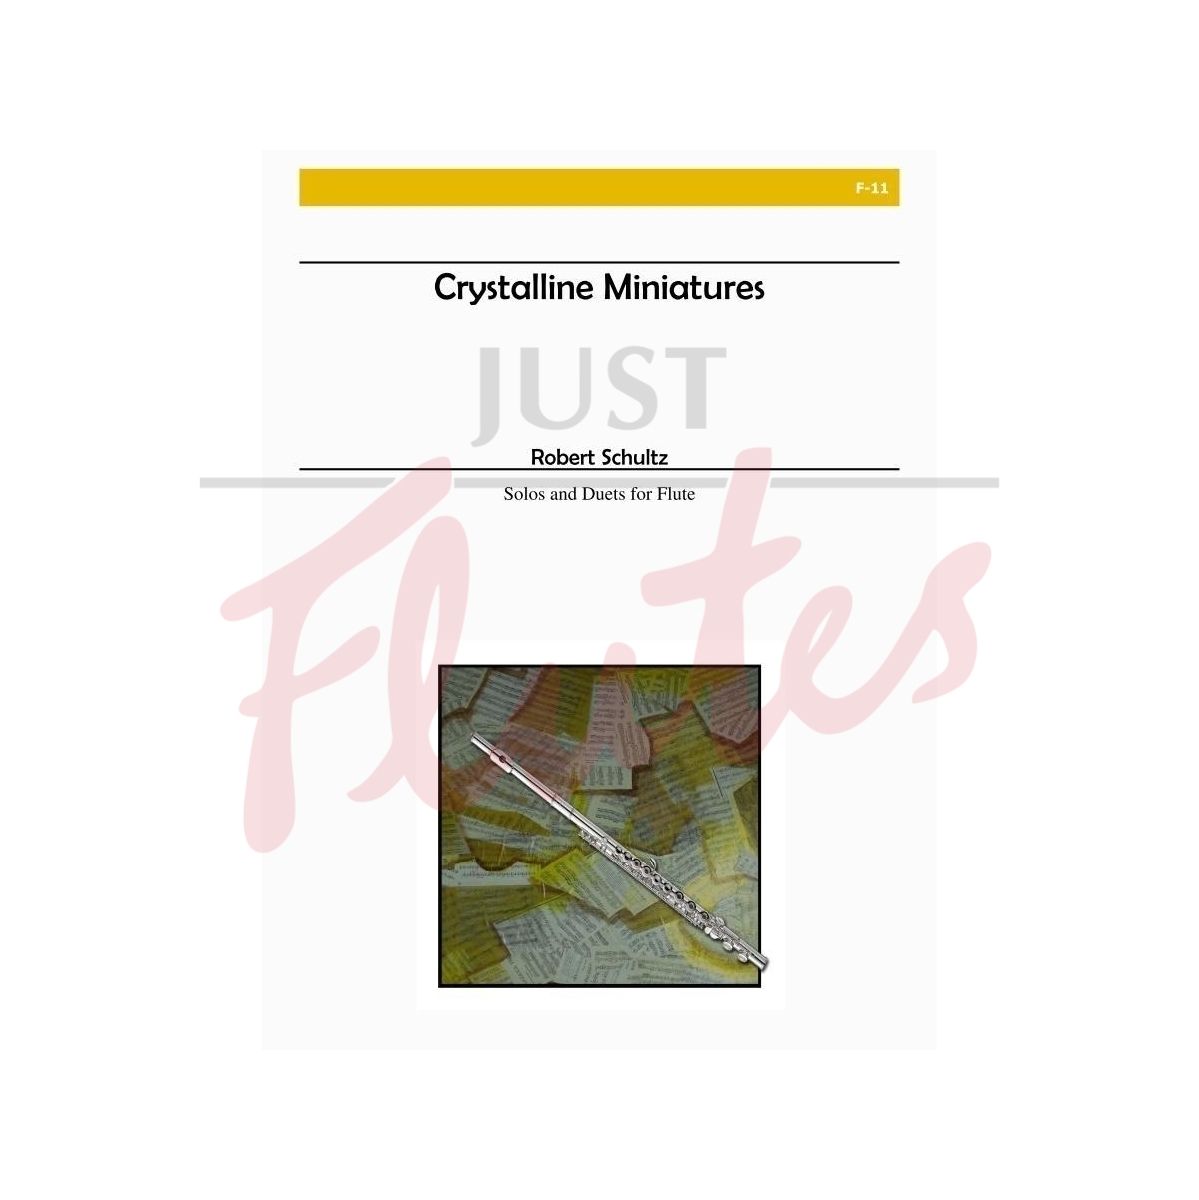 Crystalline Miniatures (Flute Solos and Duets)